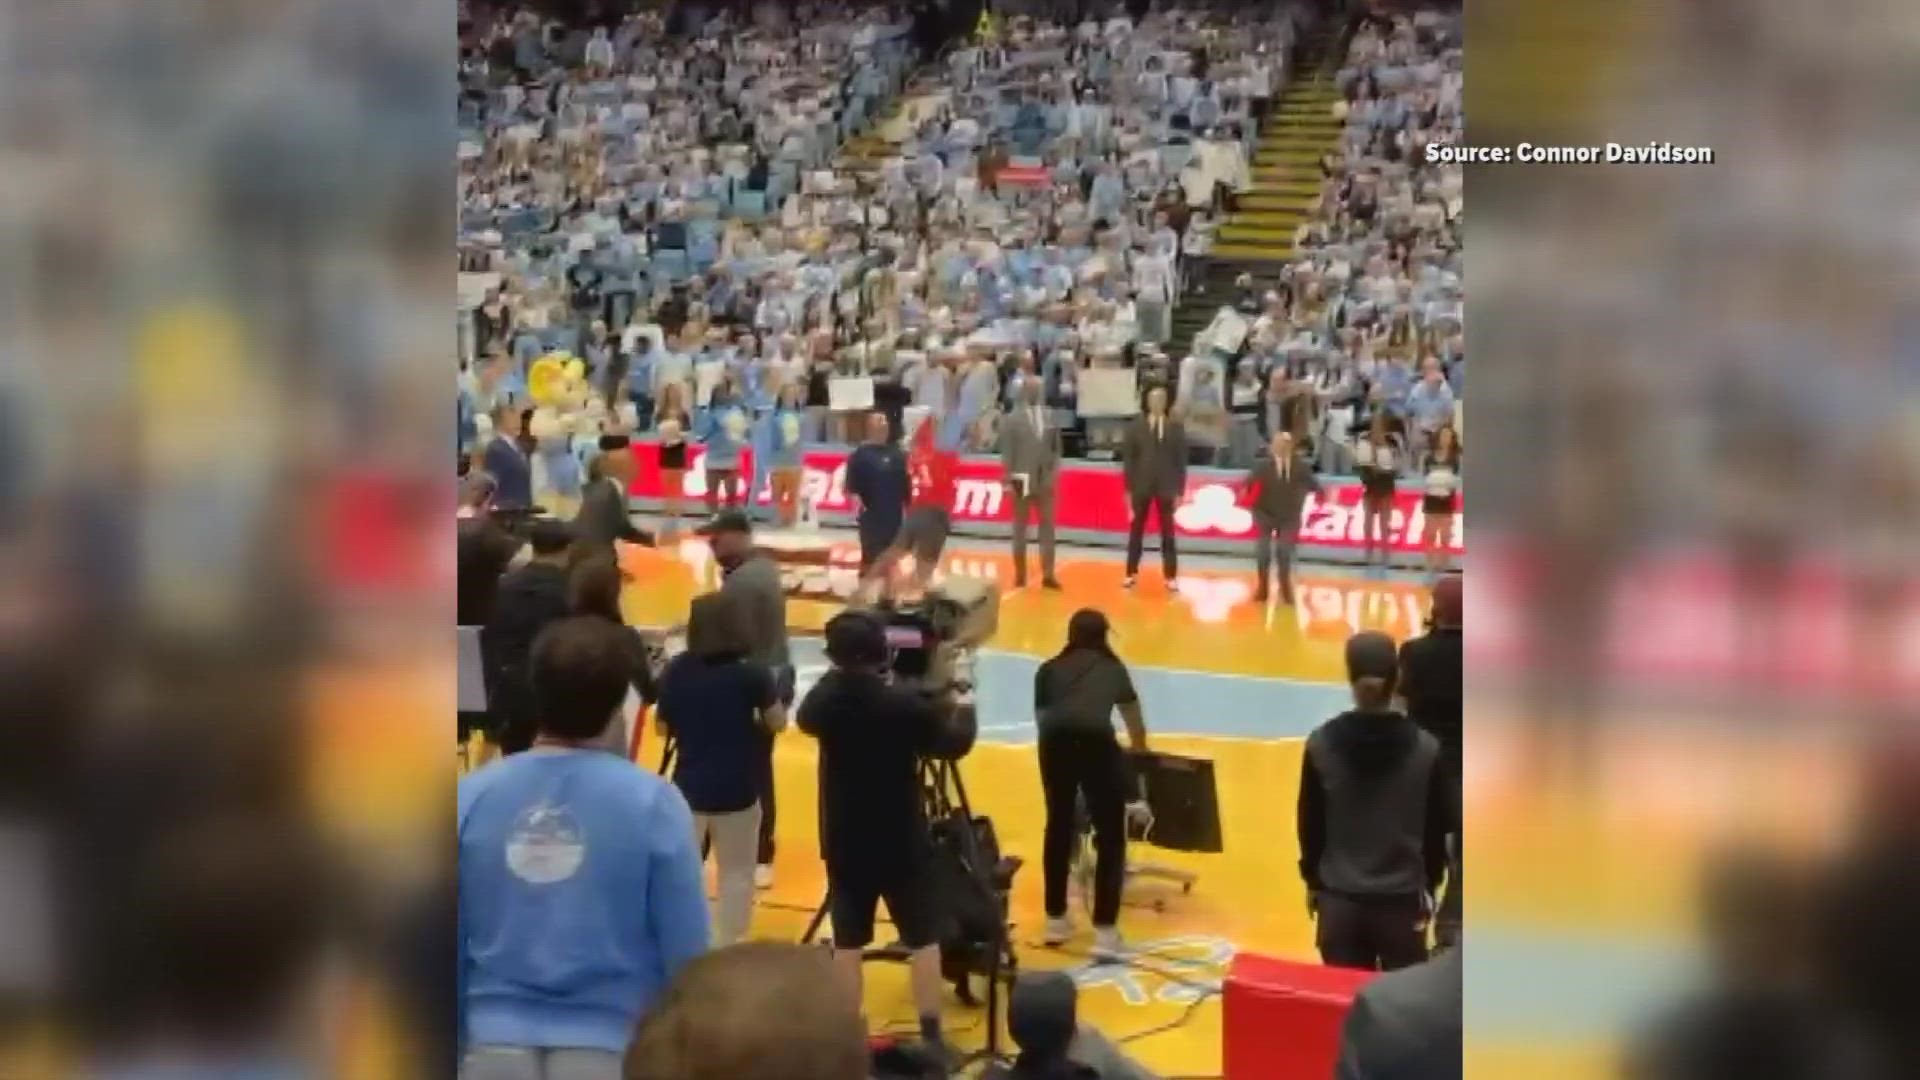 Javon Comer, from Thomasville, said he just had a feeling he would make the shot. He did just that during the UNC-Duke game while ESPN’s College Gameday was there!